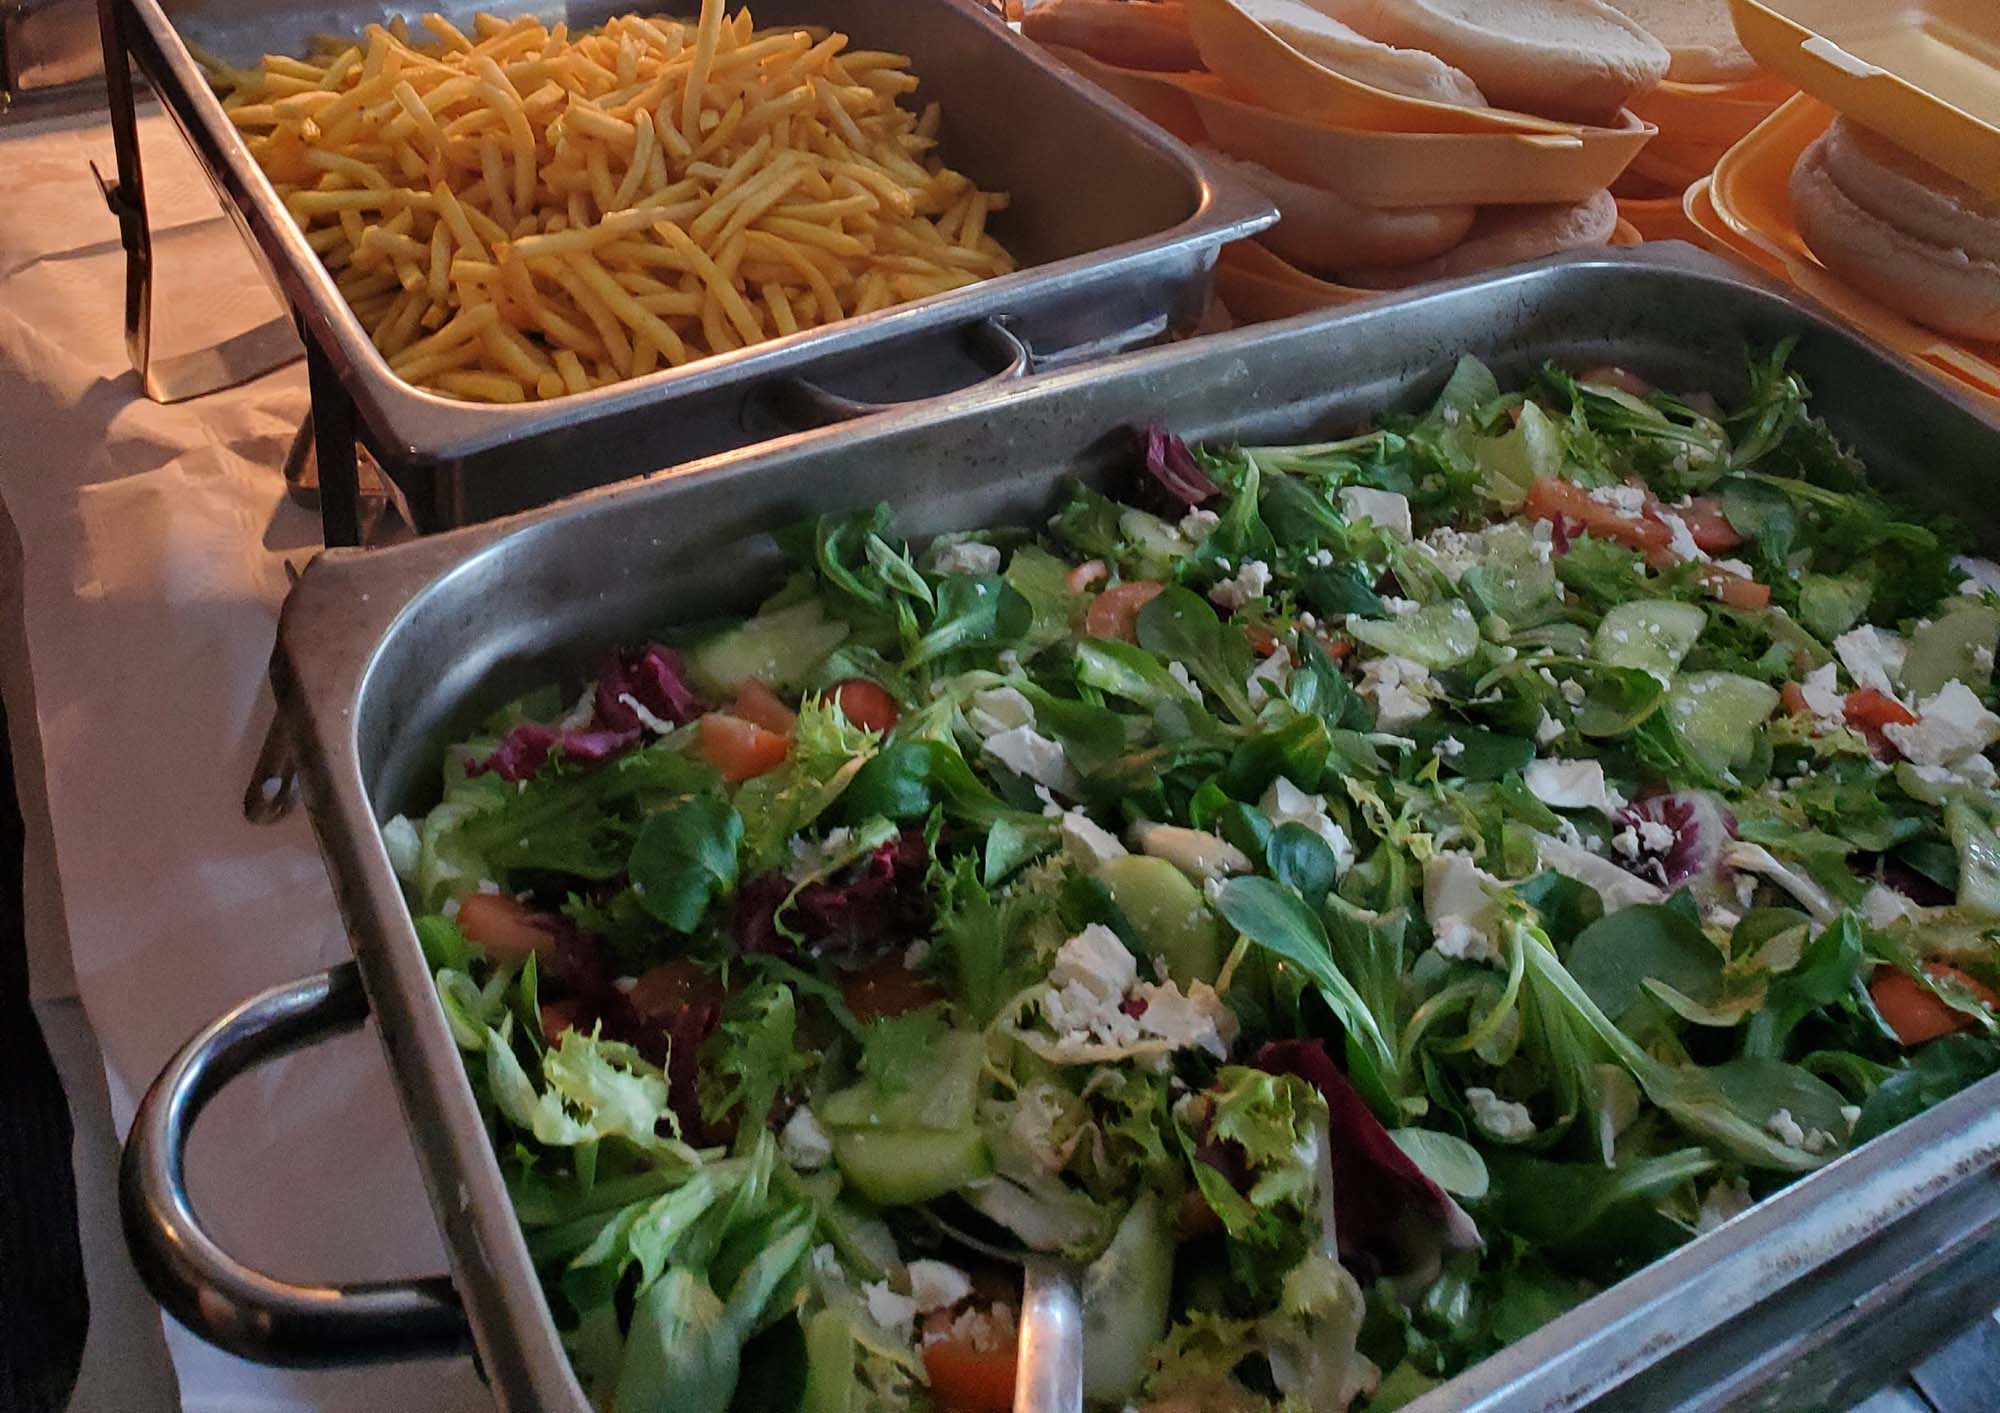 trays of salad and chips ready to be served